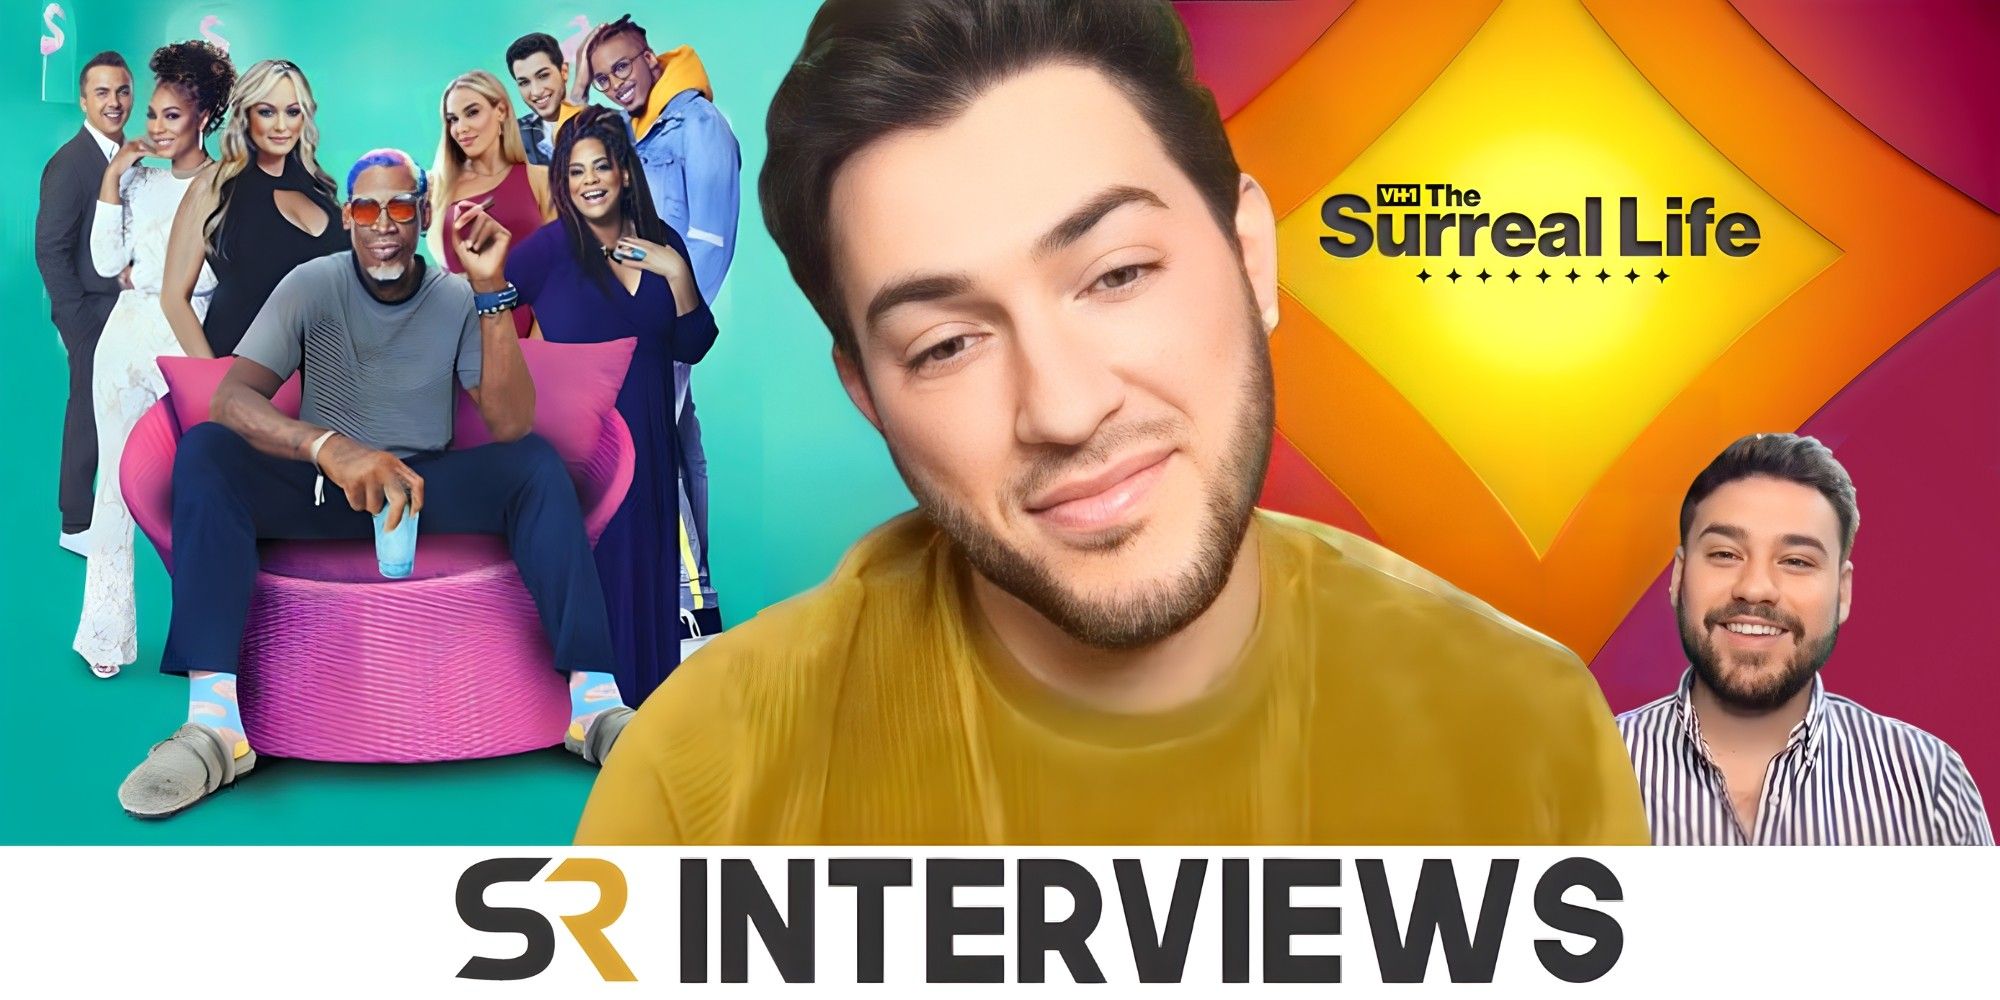 the surreal life montage manny mua with SR interviews text